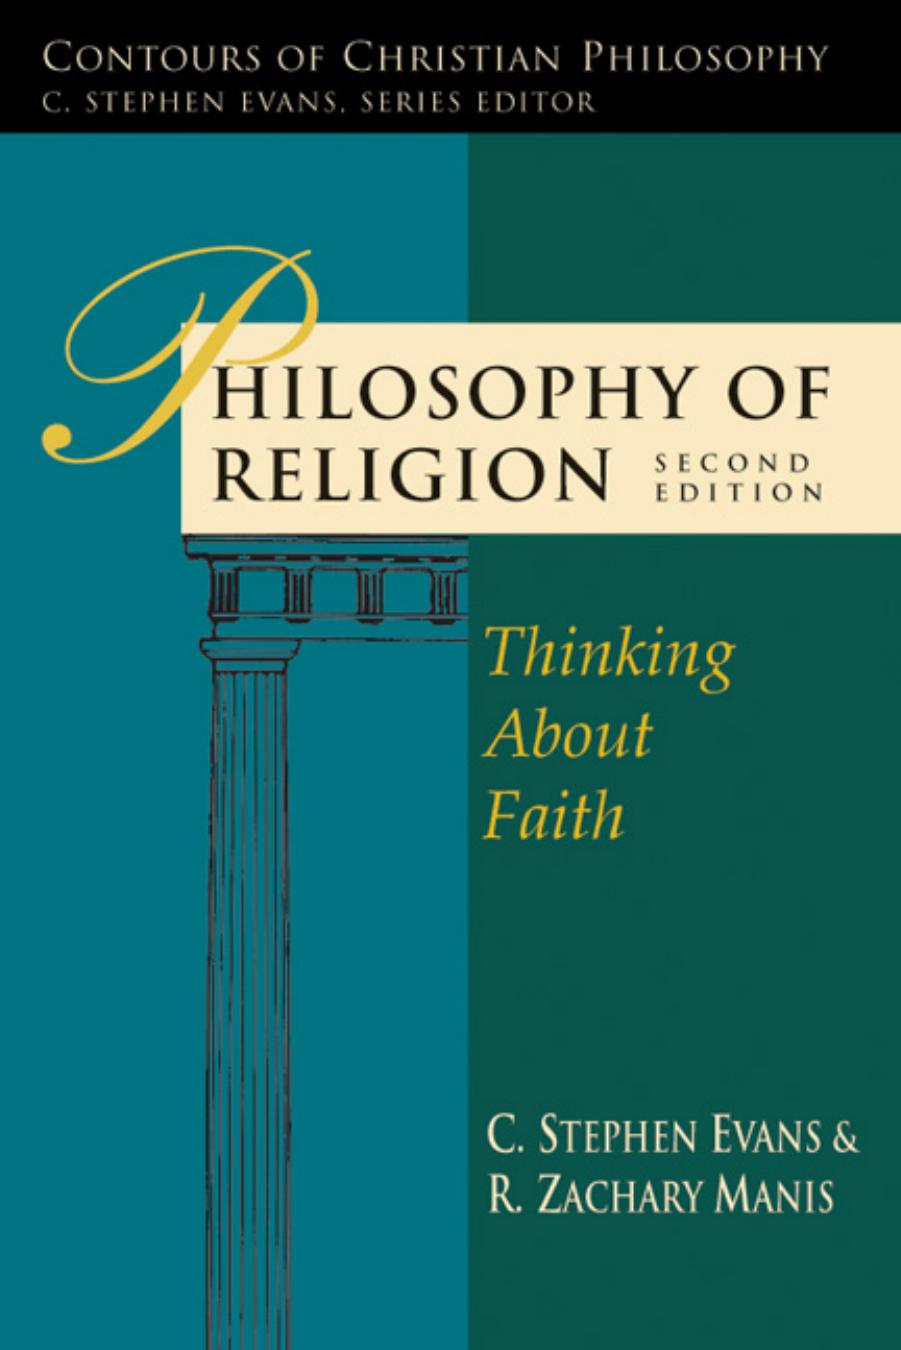 Contours of Christian Philosophy : Philosophy of Religion : Thinking about Faith (2nd Edition)